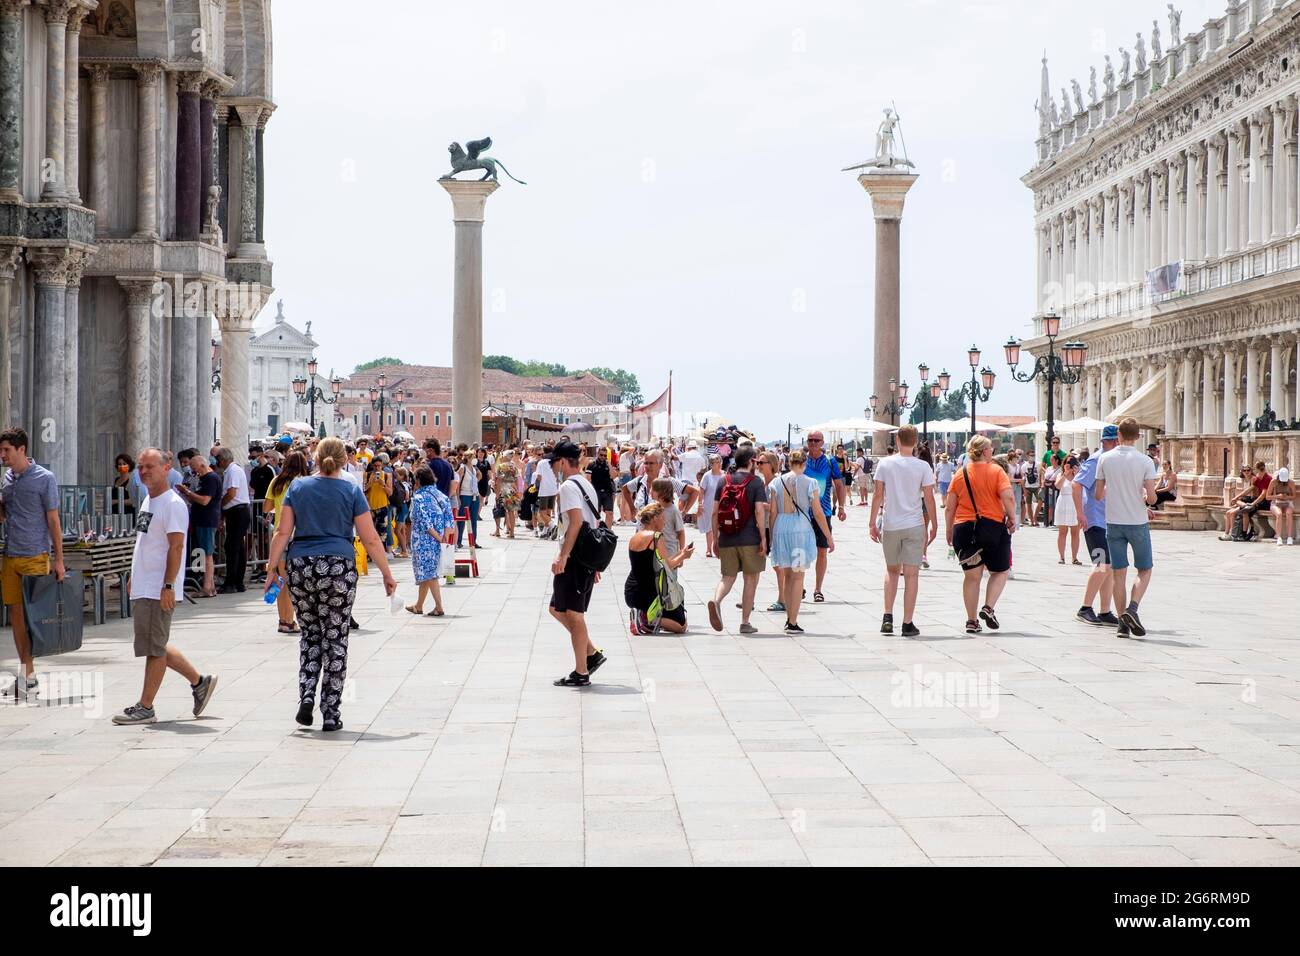 VENICE, ITALY - July 8: Tourist visit Venice during the G20 at the Arsenale on July 8, 2021 in Venice, Italy. The G20 in Venice will open from July 8th to July 11th. Credit: Luca Zanon Alamy Live News Stock Photo